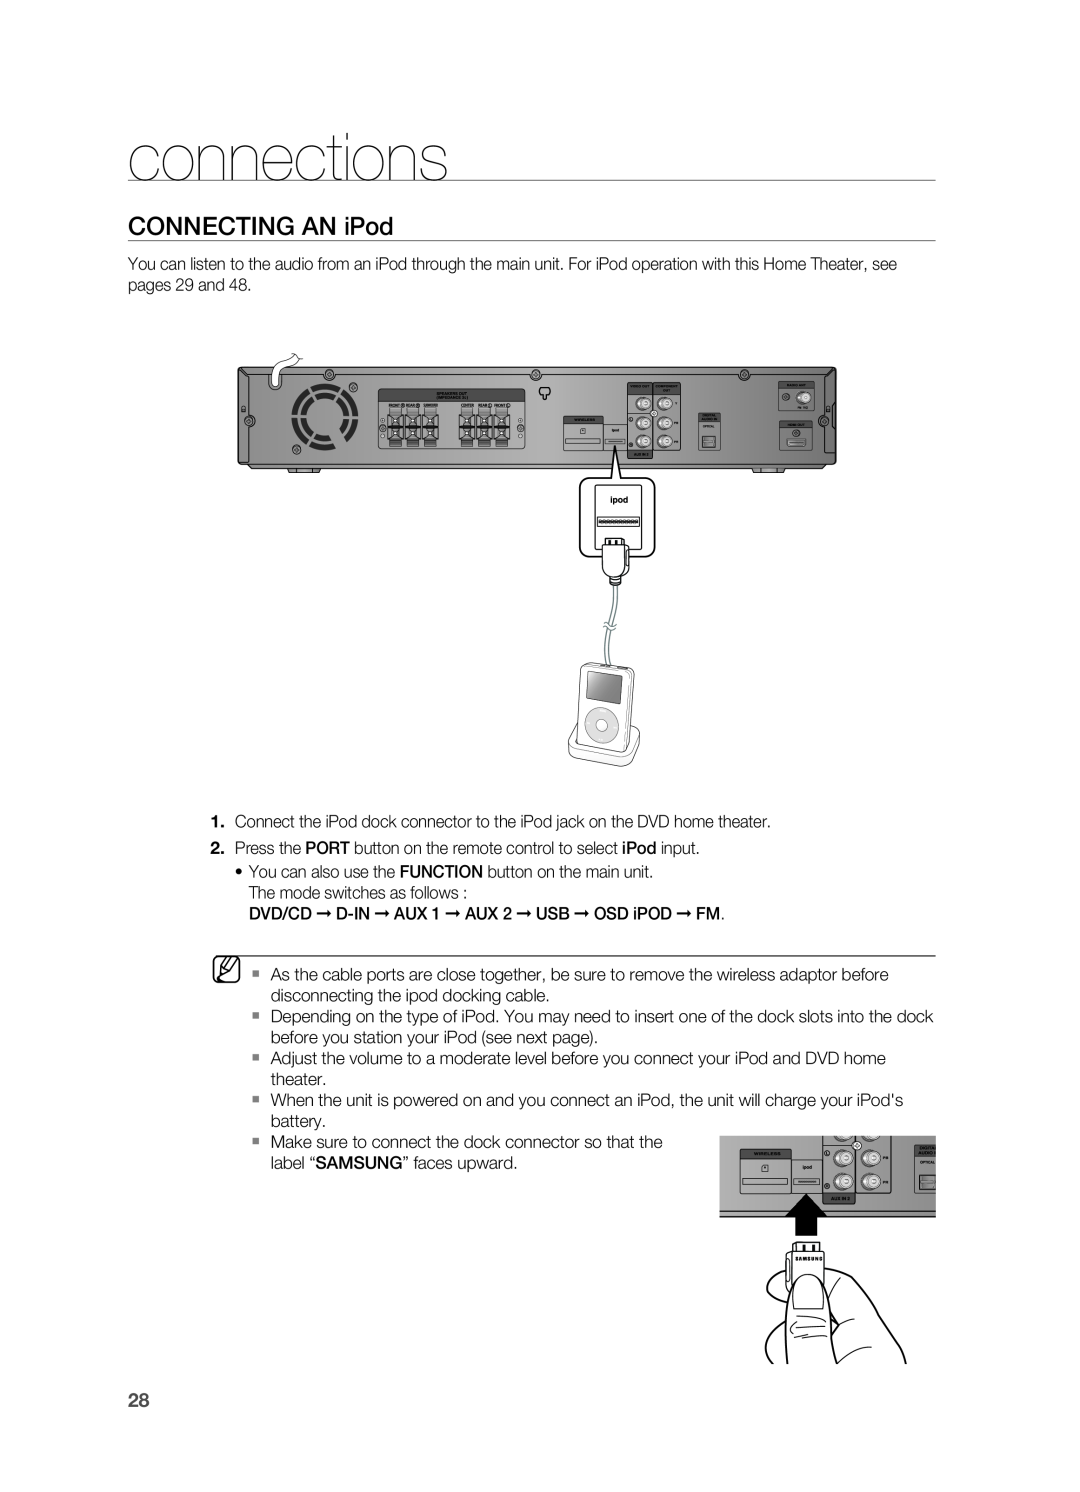 Samsung HT-TWZ415 user manual Connecting an iPod, connections 